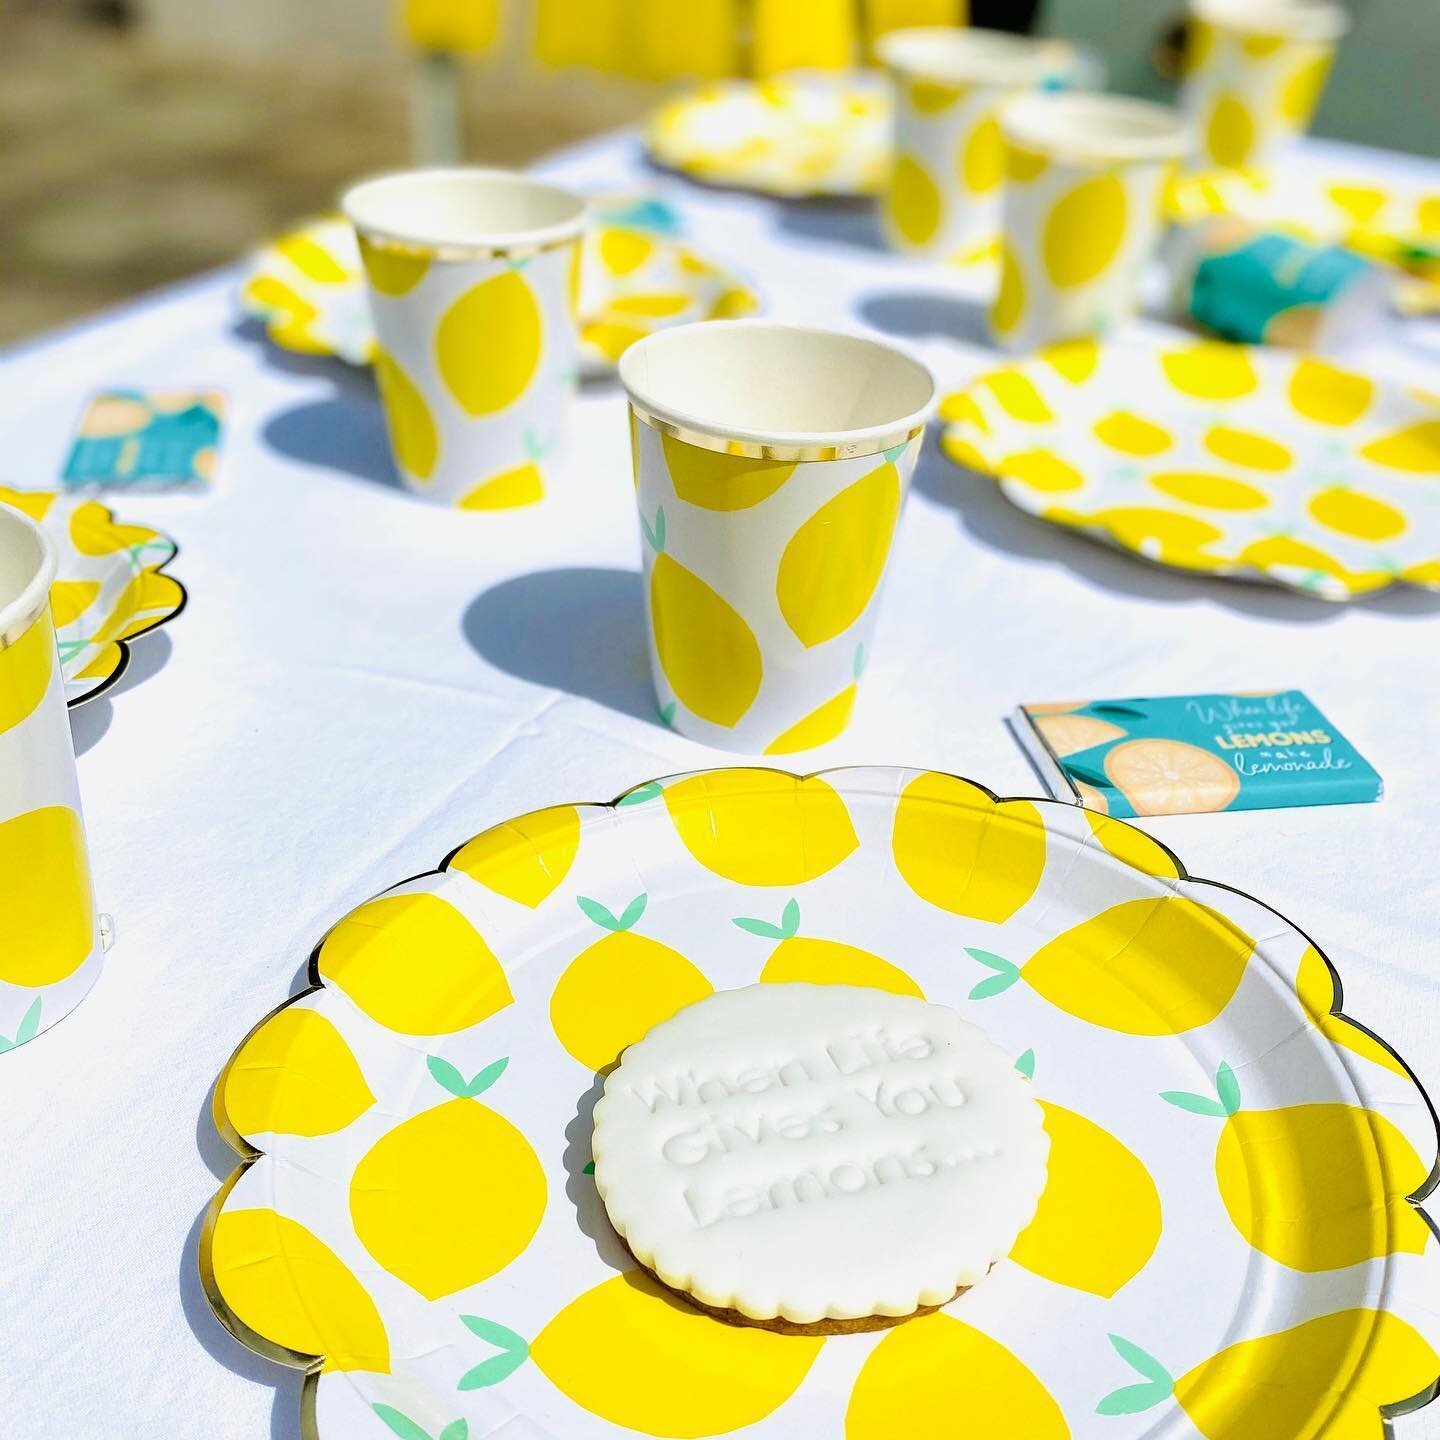 The perfect tableware for this lemon themed 13th birthday party. Bright, fresh and ever so cute! 🍋